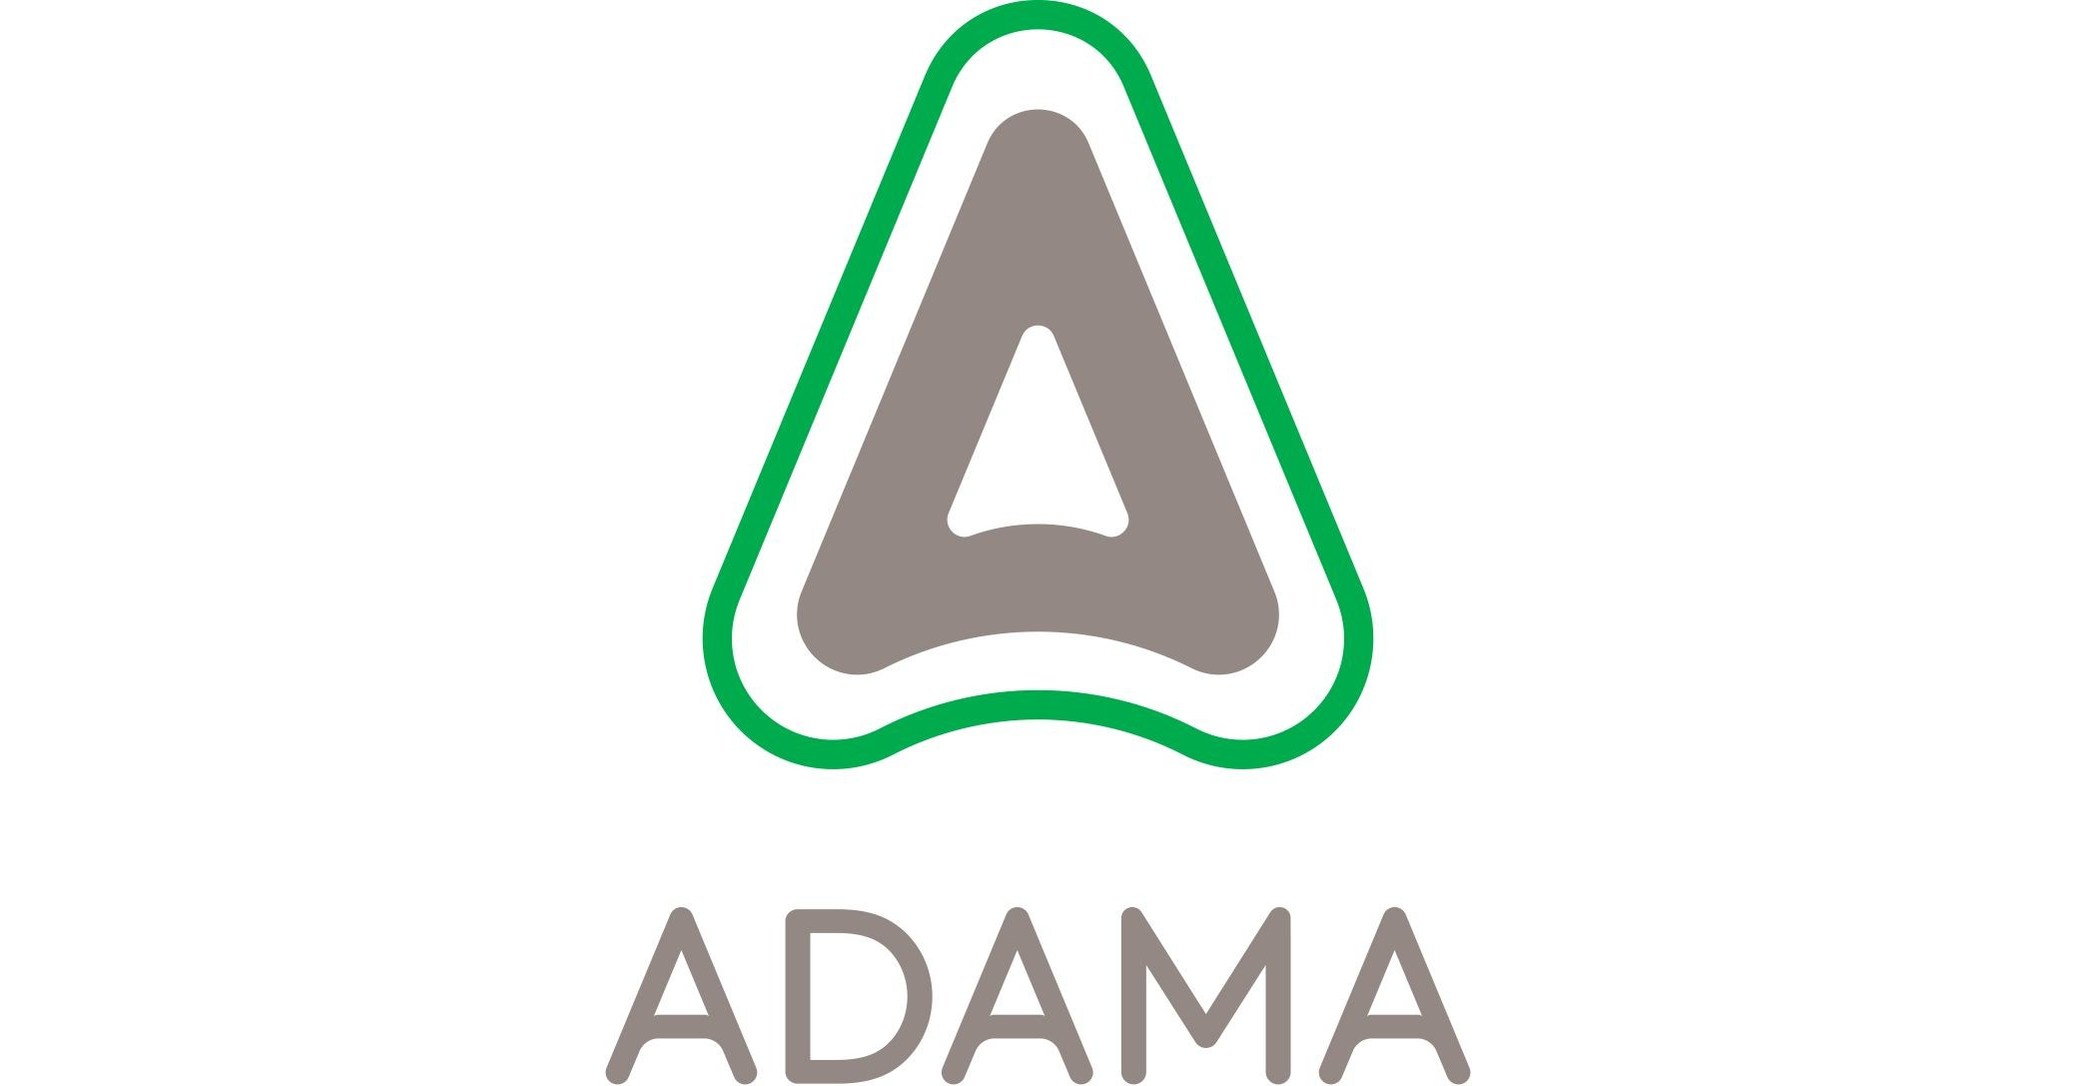 ADAMA Launches Timeline® FX, to Deliver Superior Control and Flexibility Over Broadleaf Weeds